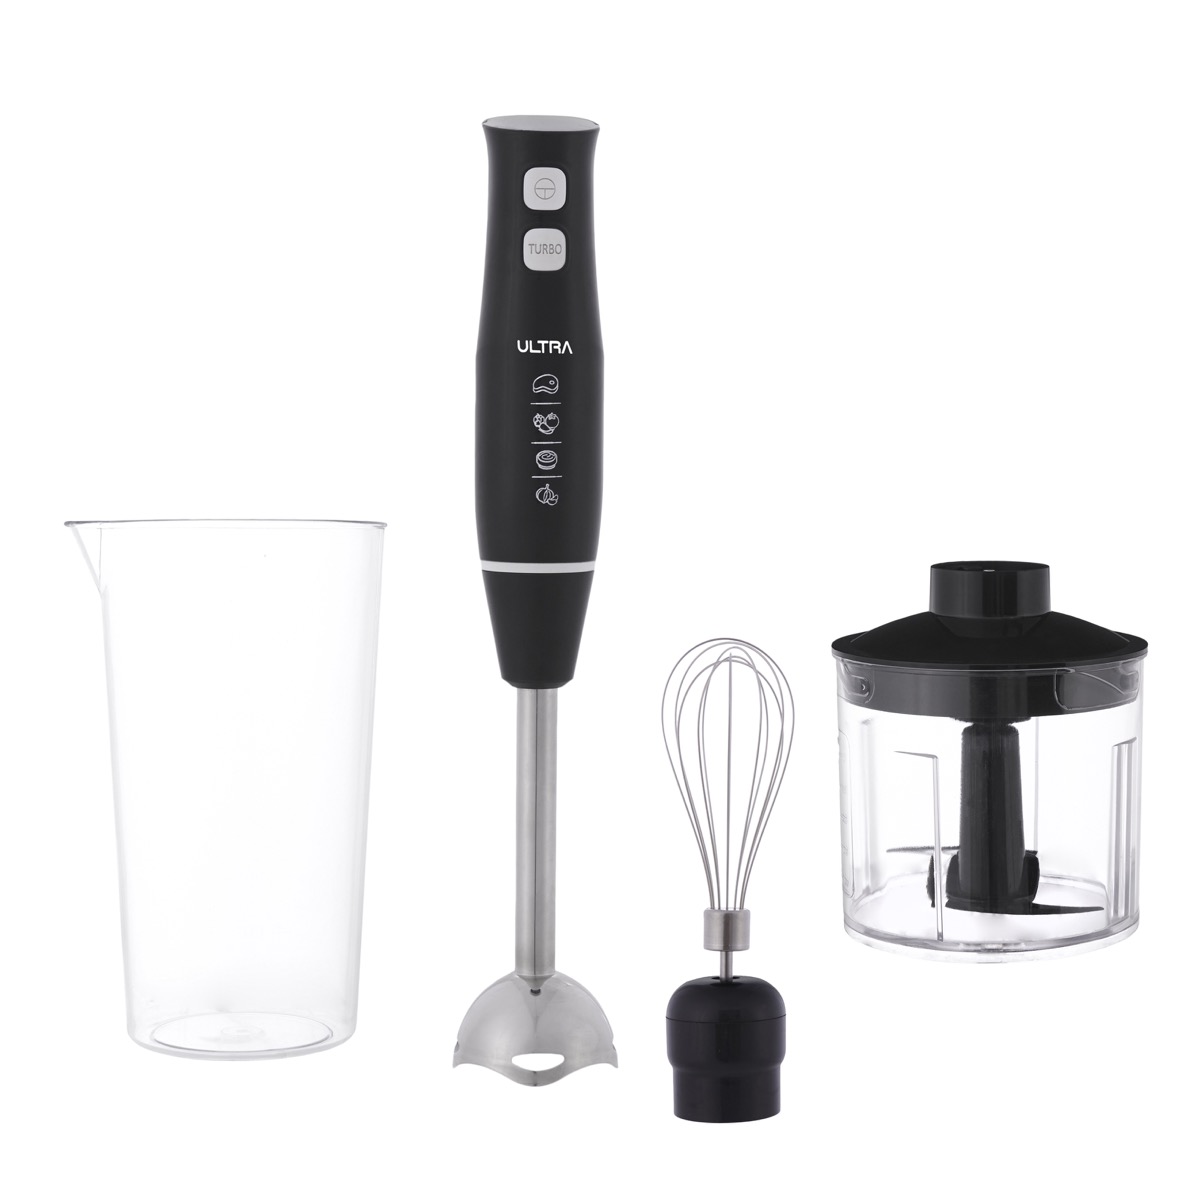 Ultra Hand Blender with Attachments, 450W, Black - UHB407E1